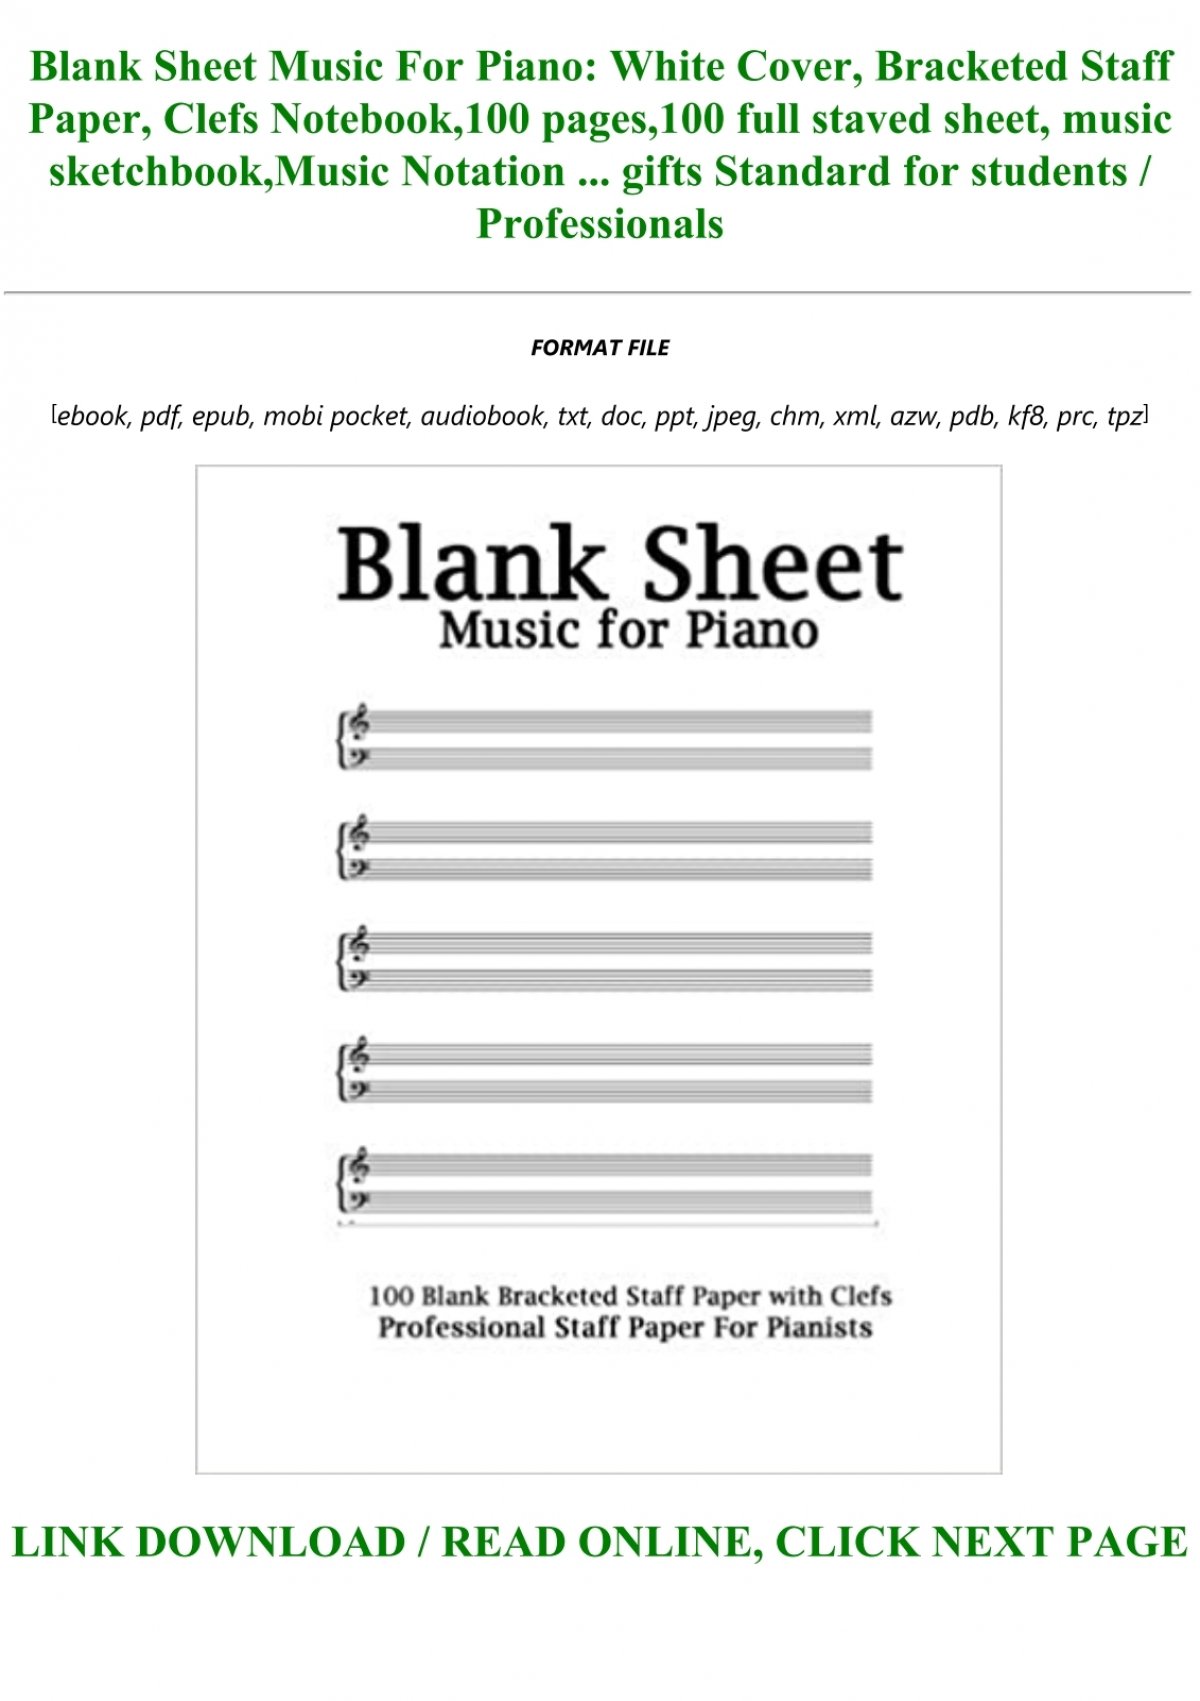 Pdf Download Blank Sheet Music For Piano White Cover Bracketed Staff Paper Clefs Notebook 100 Pages 100 Full Staved Sheet Music Sketchbook Music Notation Gifts Standard For Students Professionals Full Books